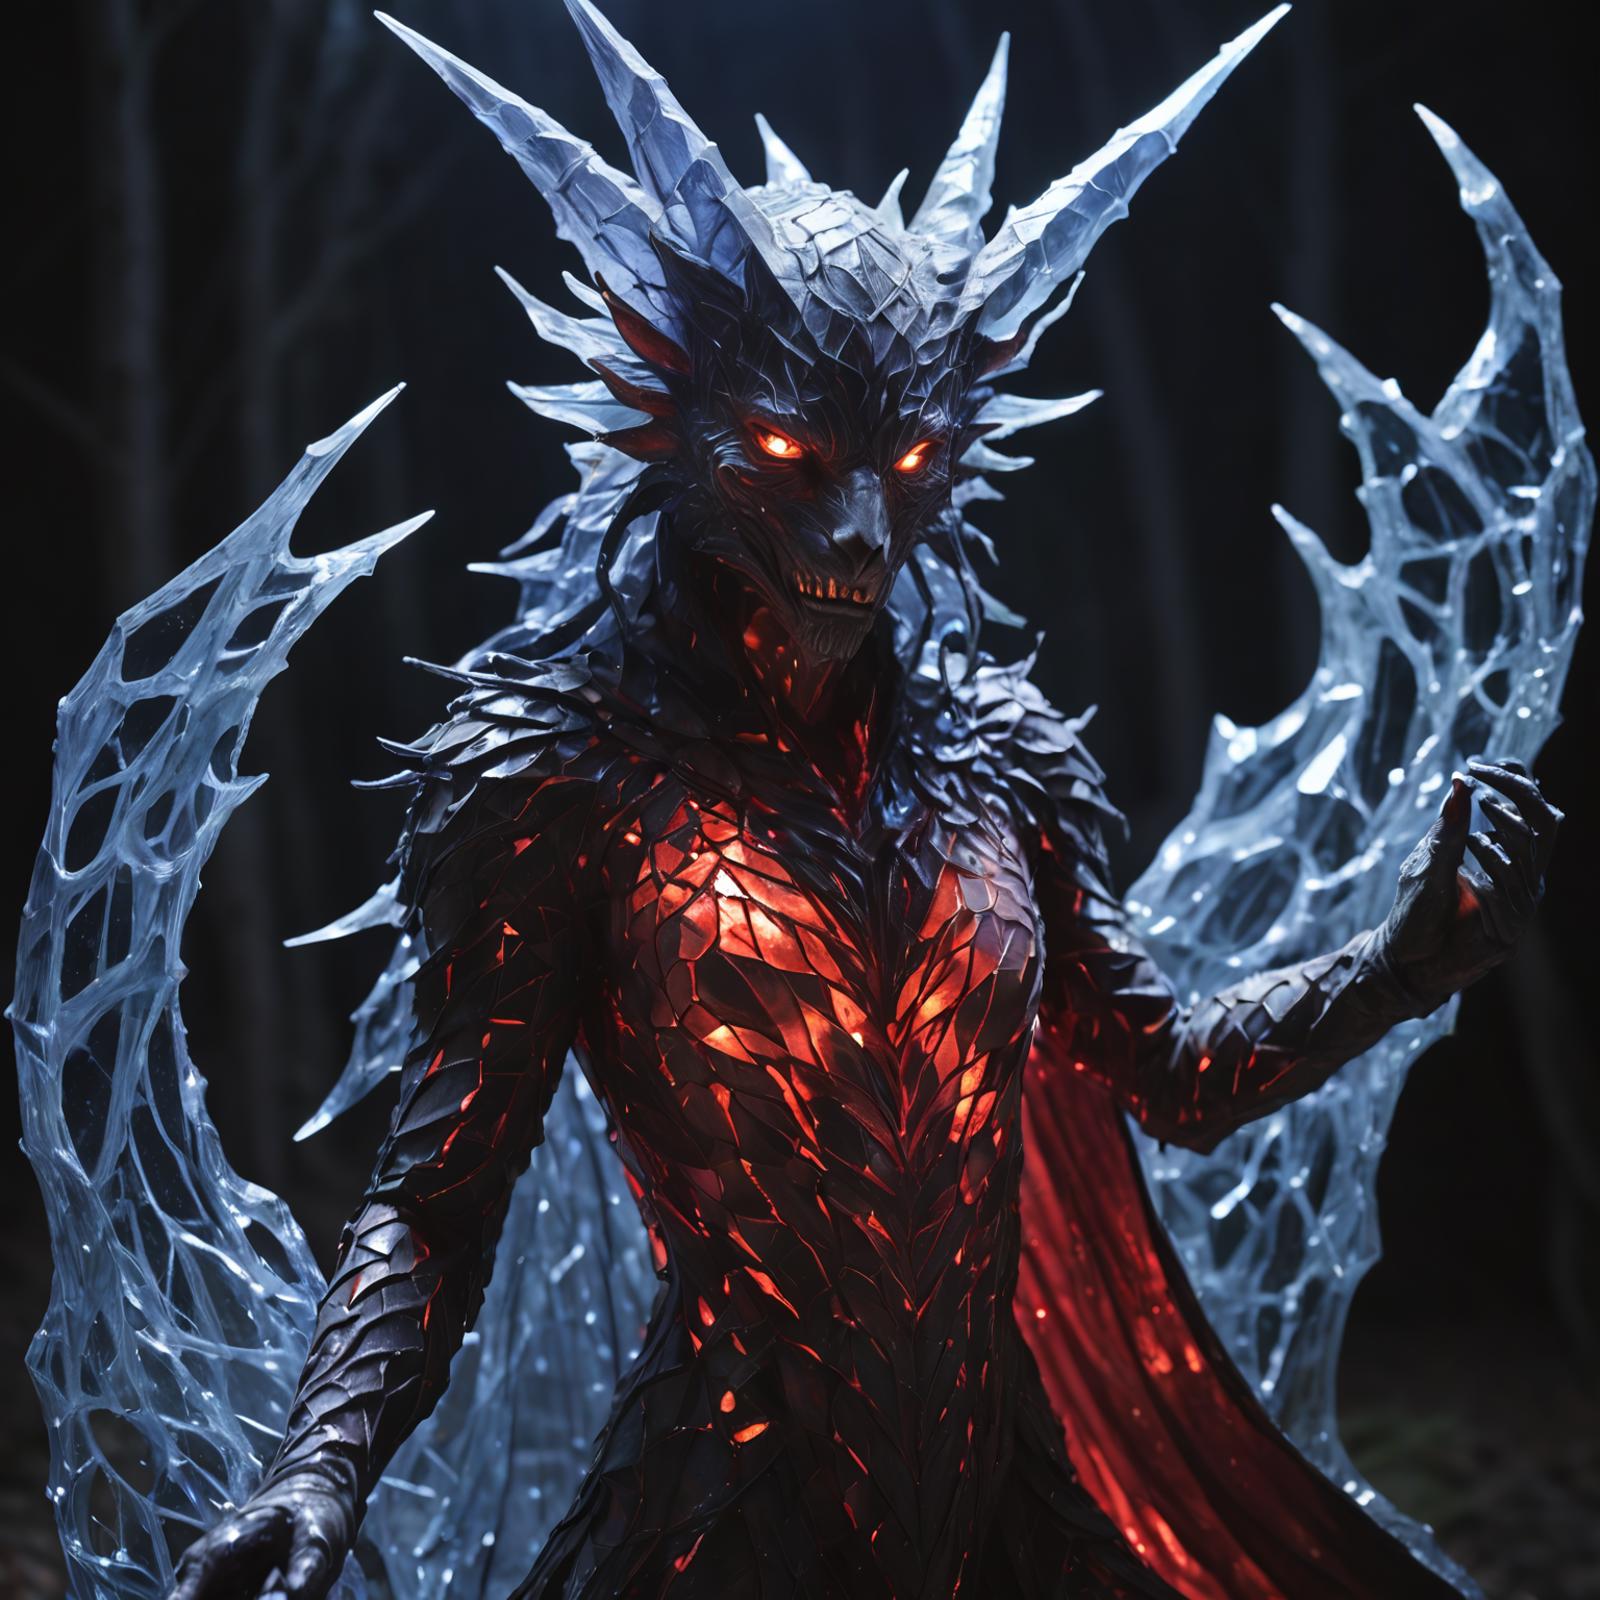 A woman with glowing red eyes, wearing a gown with wings, and standing in a dark forest.